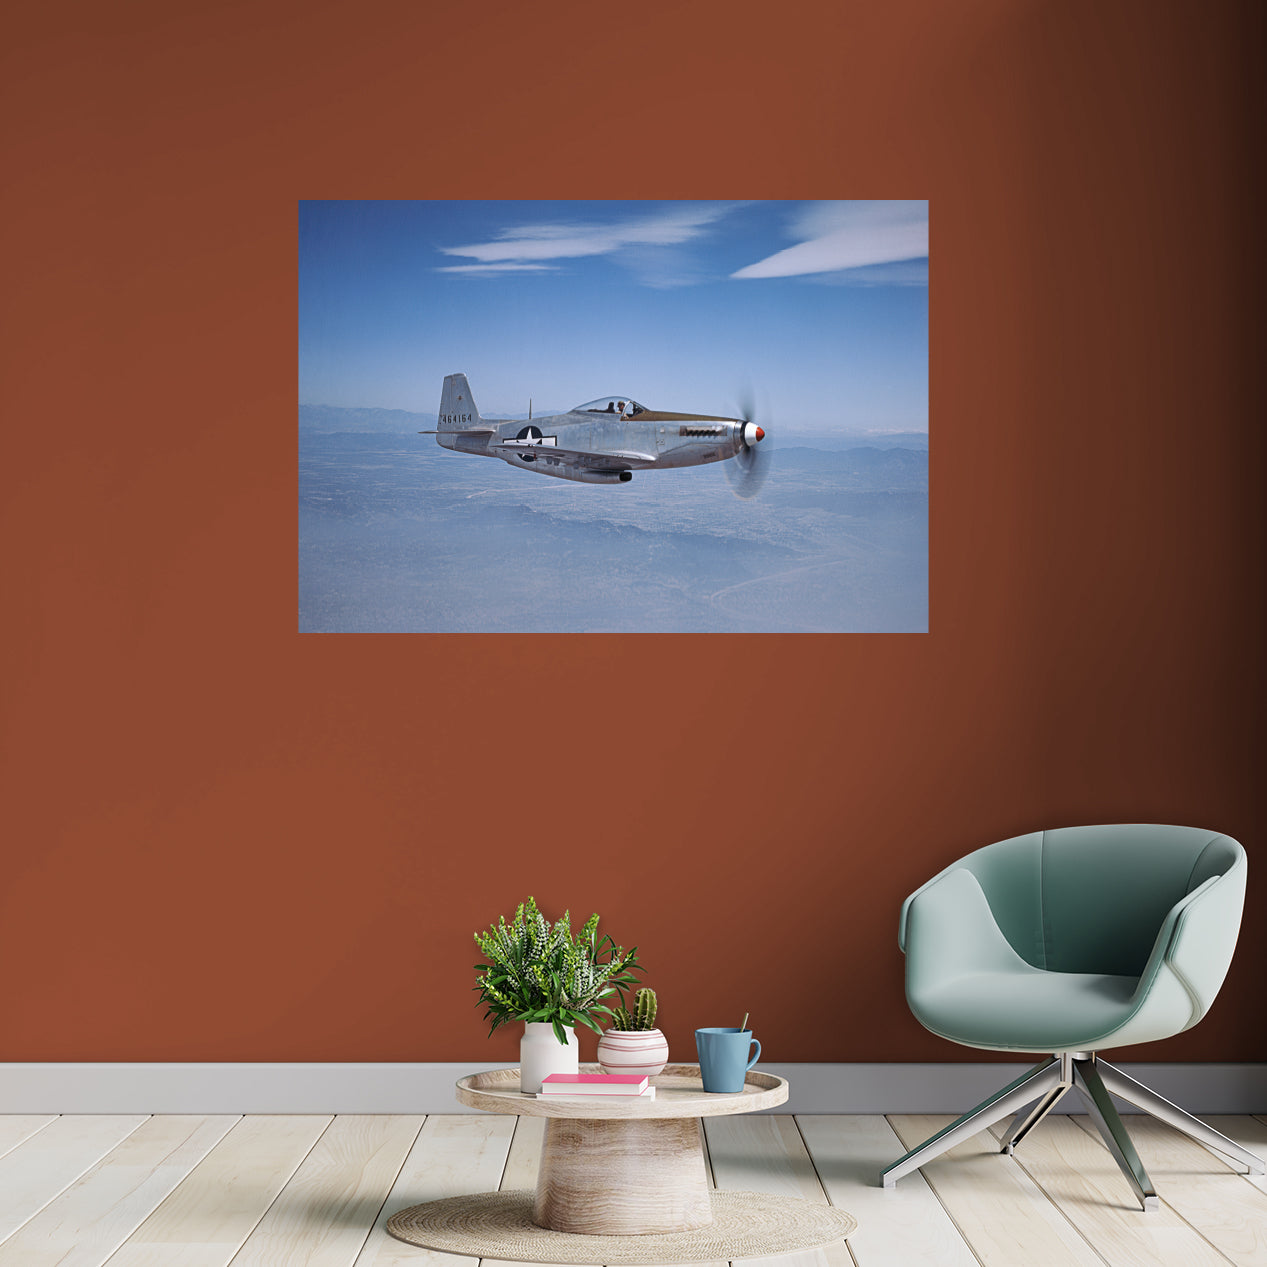 Boeing: Boeing 84-154c Poster - Officially Licensed Boeing Removable Adhesive Decal